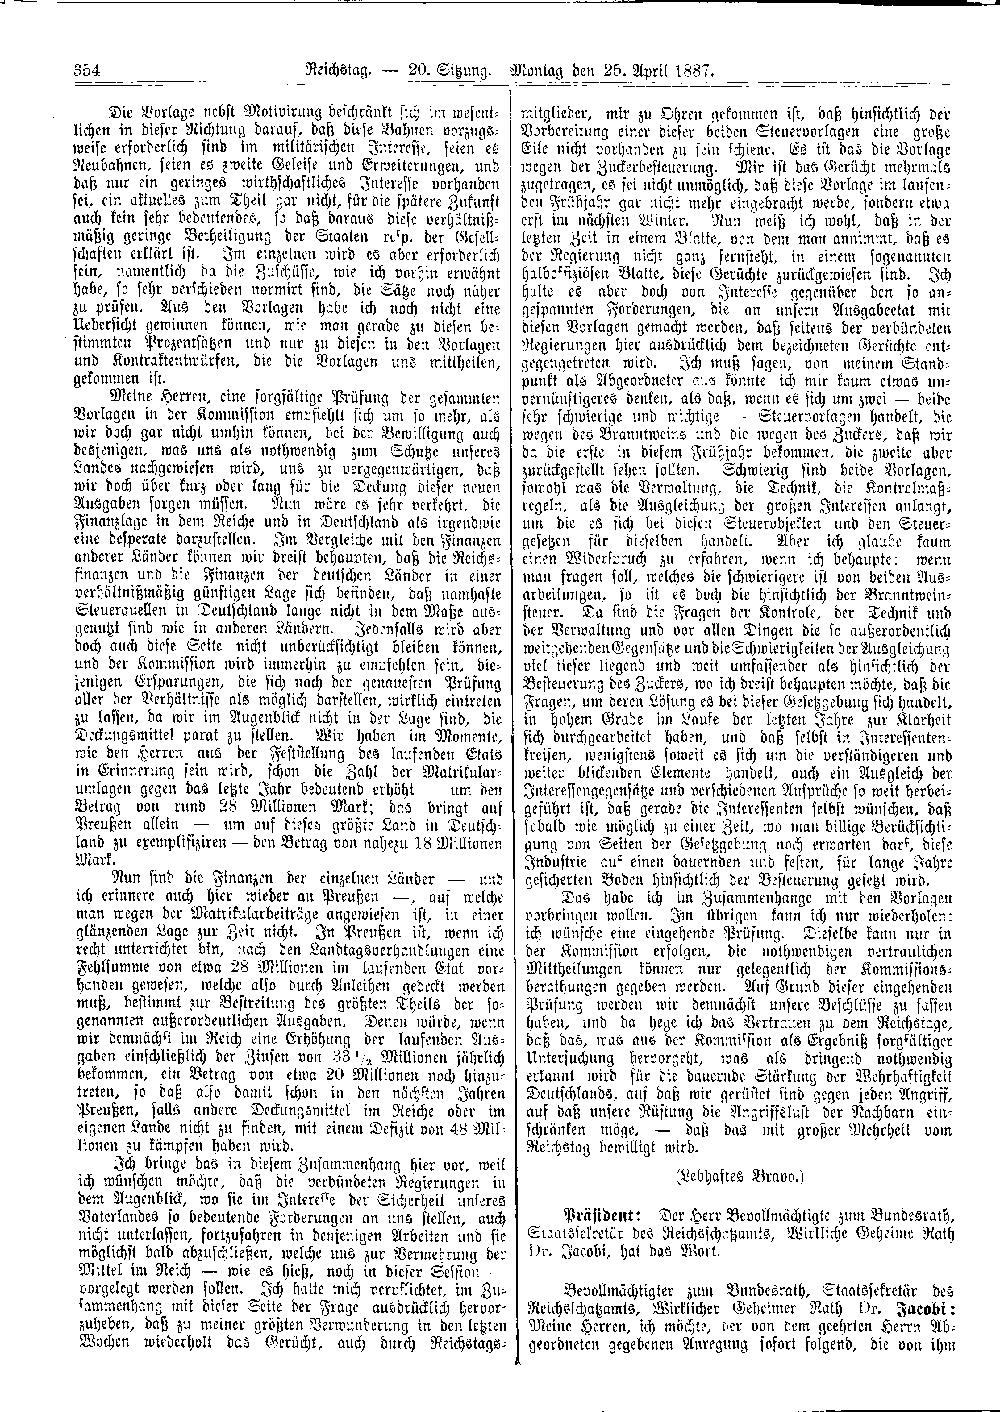 Scan of page 354